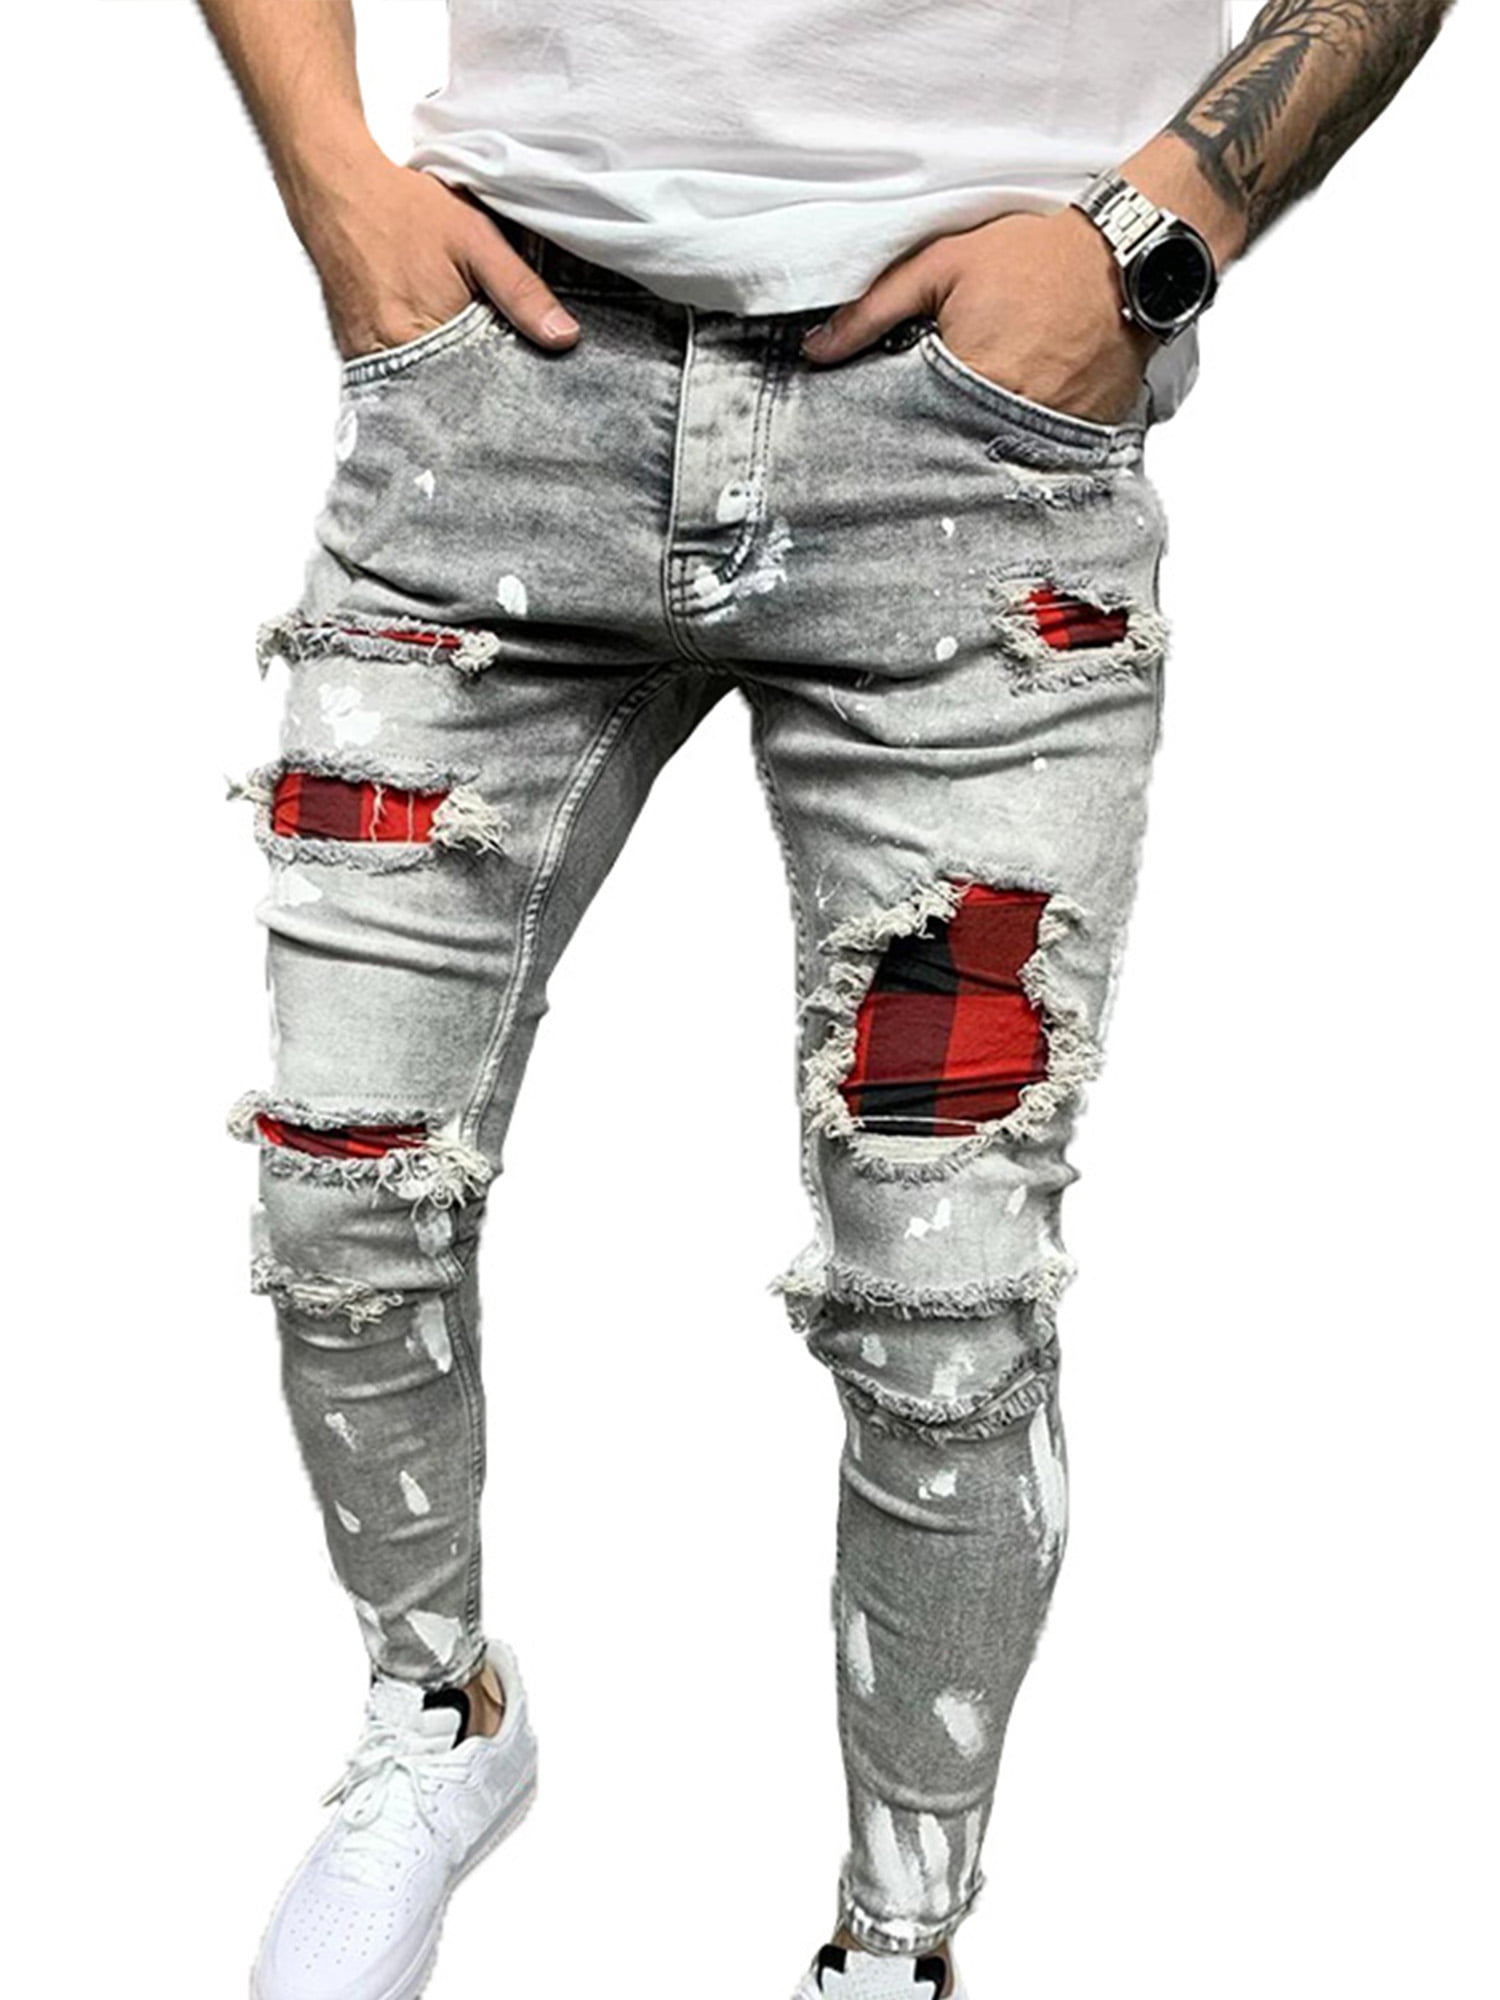 Boys Skinny Fit Ripped Distressed Stretch Washed Fashion Kids Denim Jeans Pants